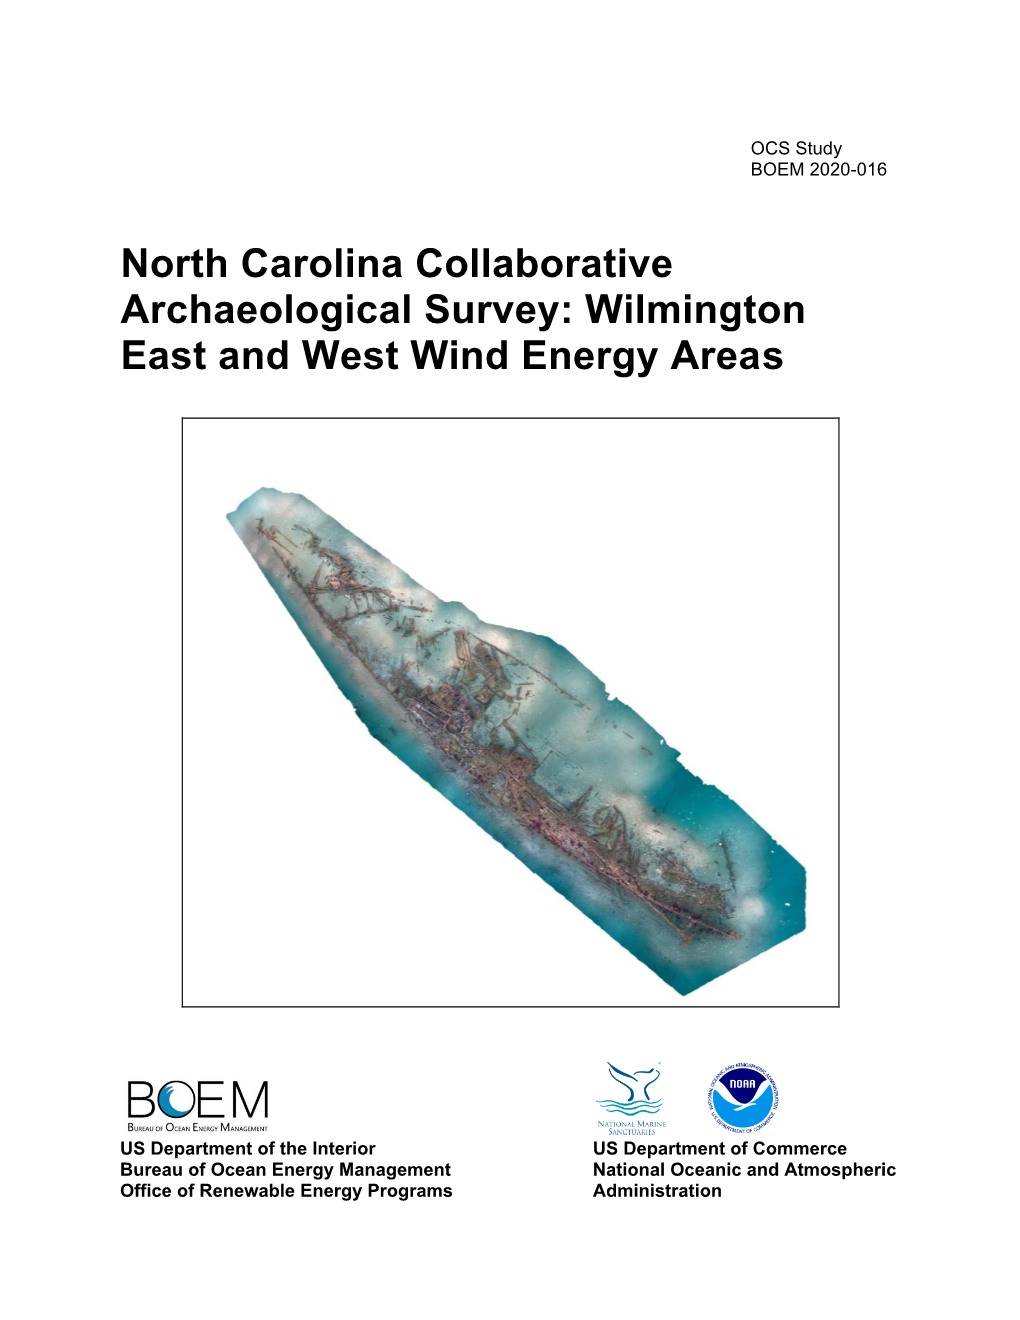 North Carolina Collaborative Archaeological Survey: Wilmington East and West Wind Energy Areas